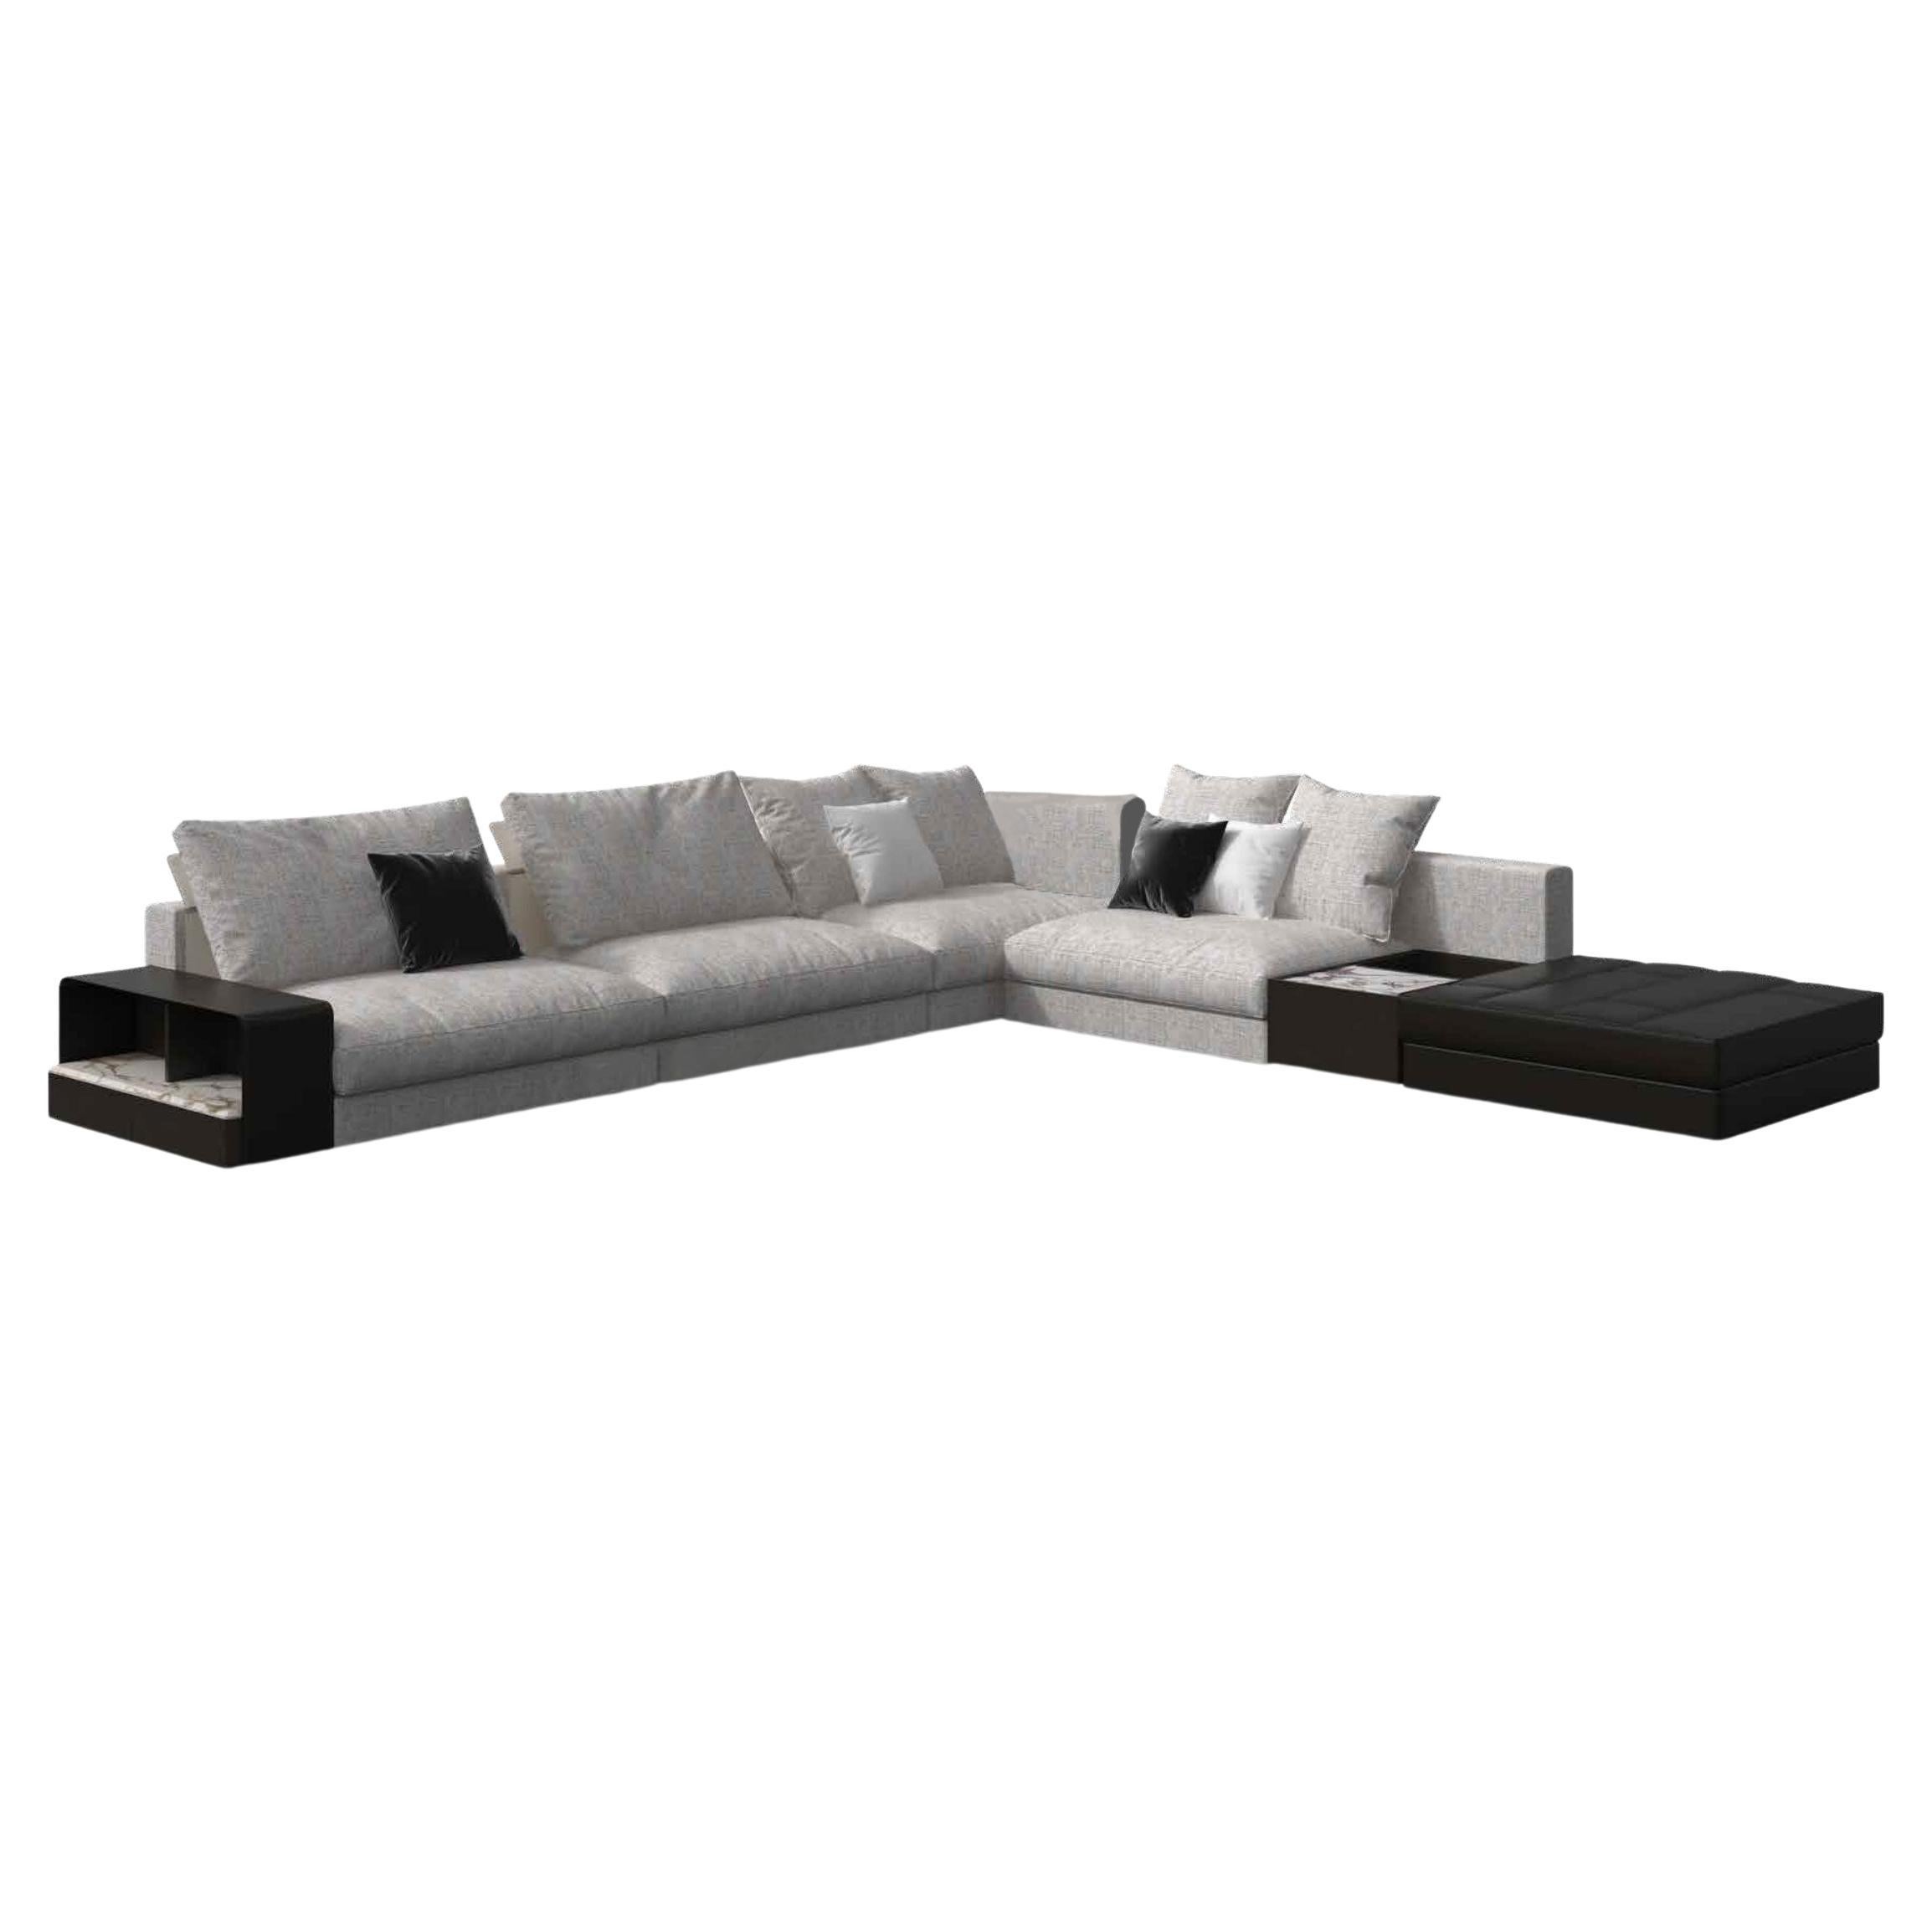 Giorgetti Skyline Sectional Sofa by Carlo Colombo  